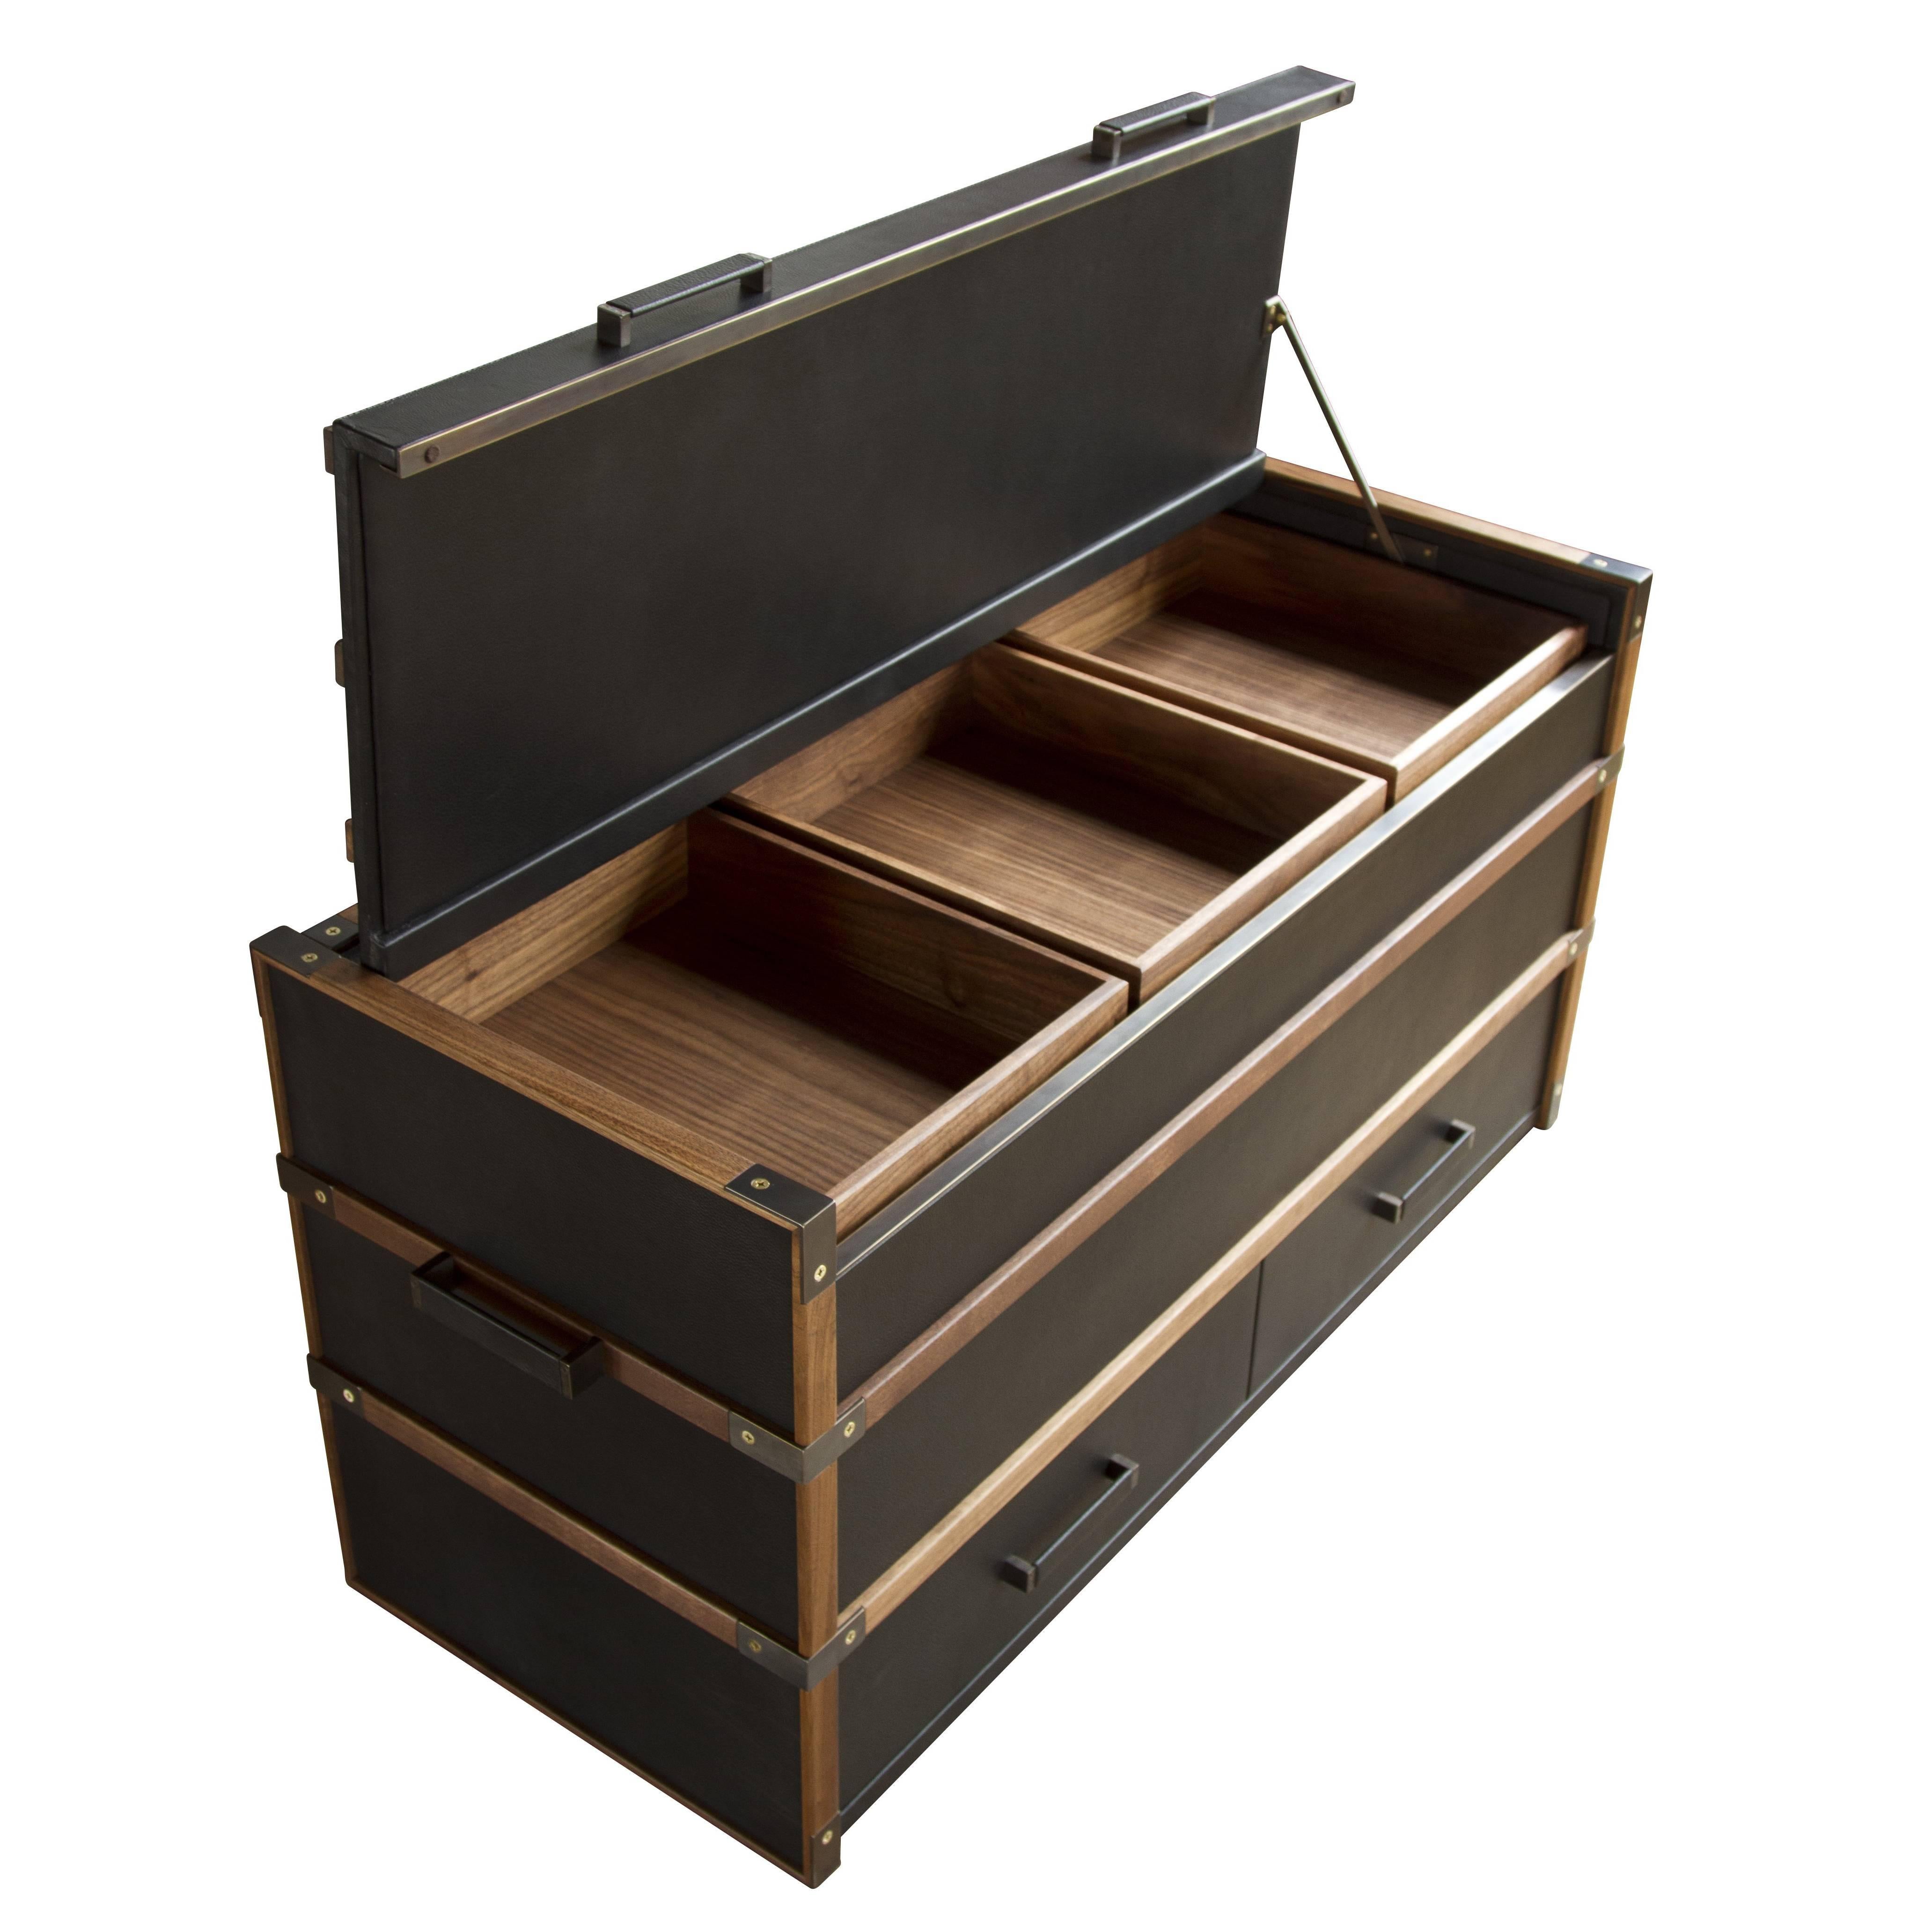 The Collingwood trunk is the first variation that we’ve made of the Collingwood Falconer’s Kit. The trunk has a top opening lid with three removable boxes with storage underneath and two drawers. The trunk is clad with hand-stitched Moore & Giles: